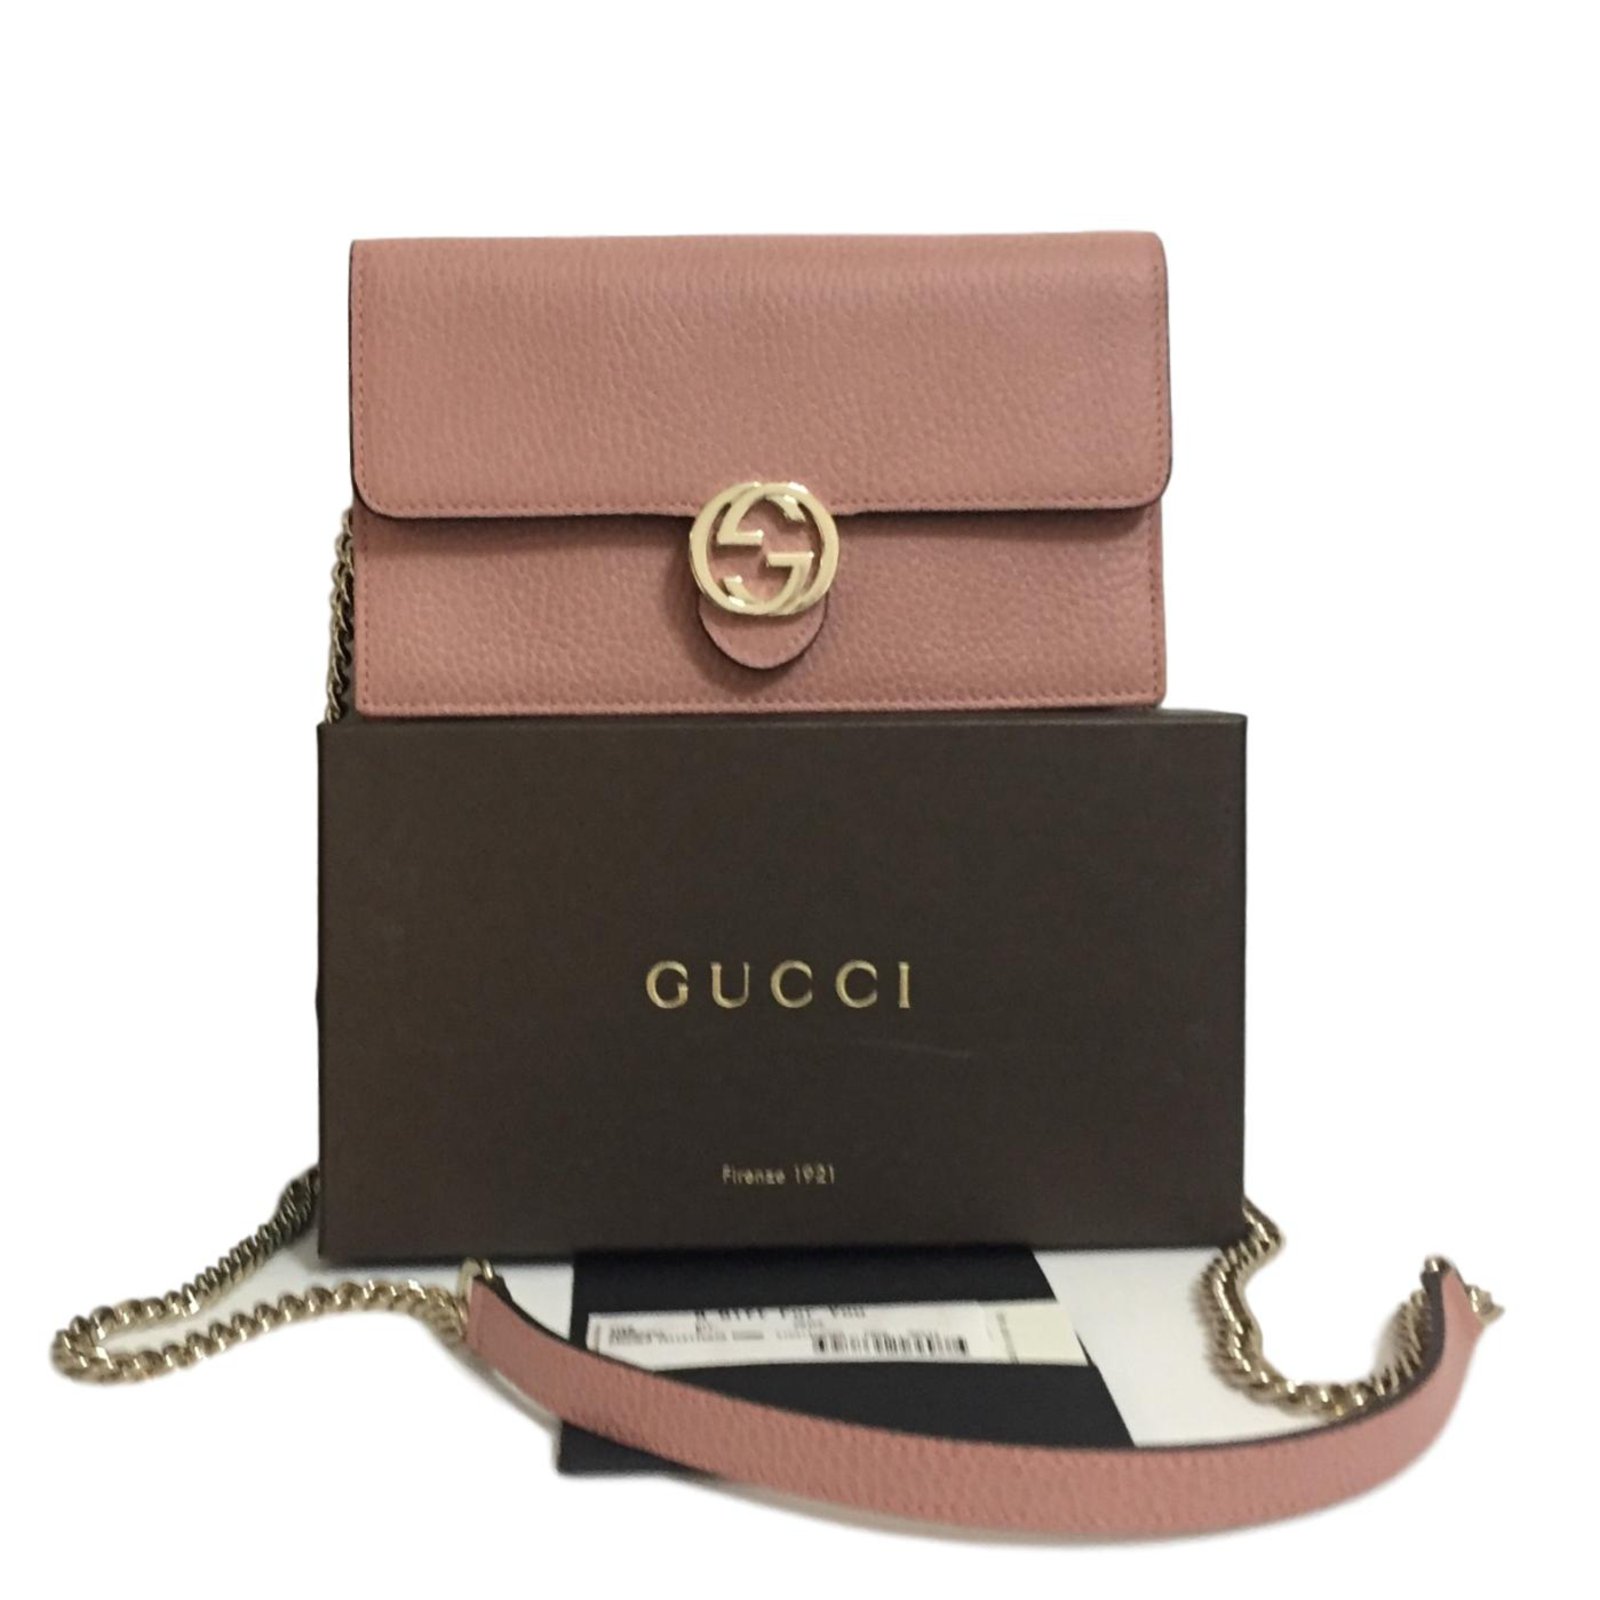 gucci clutch with chain